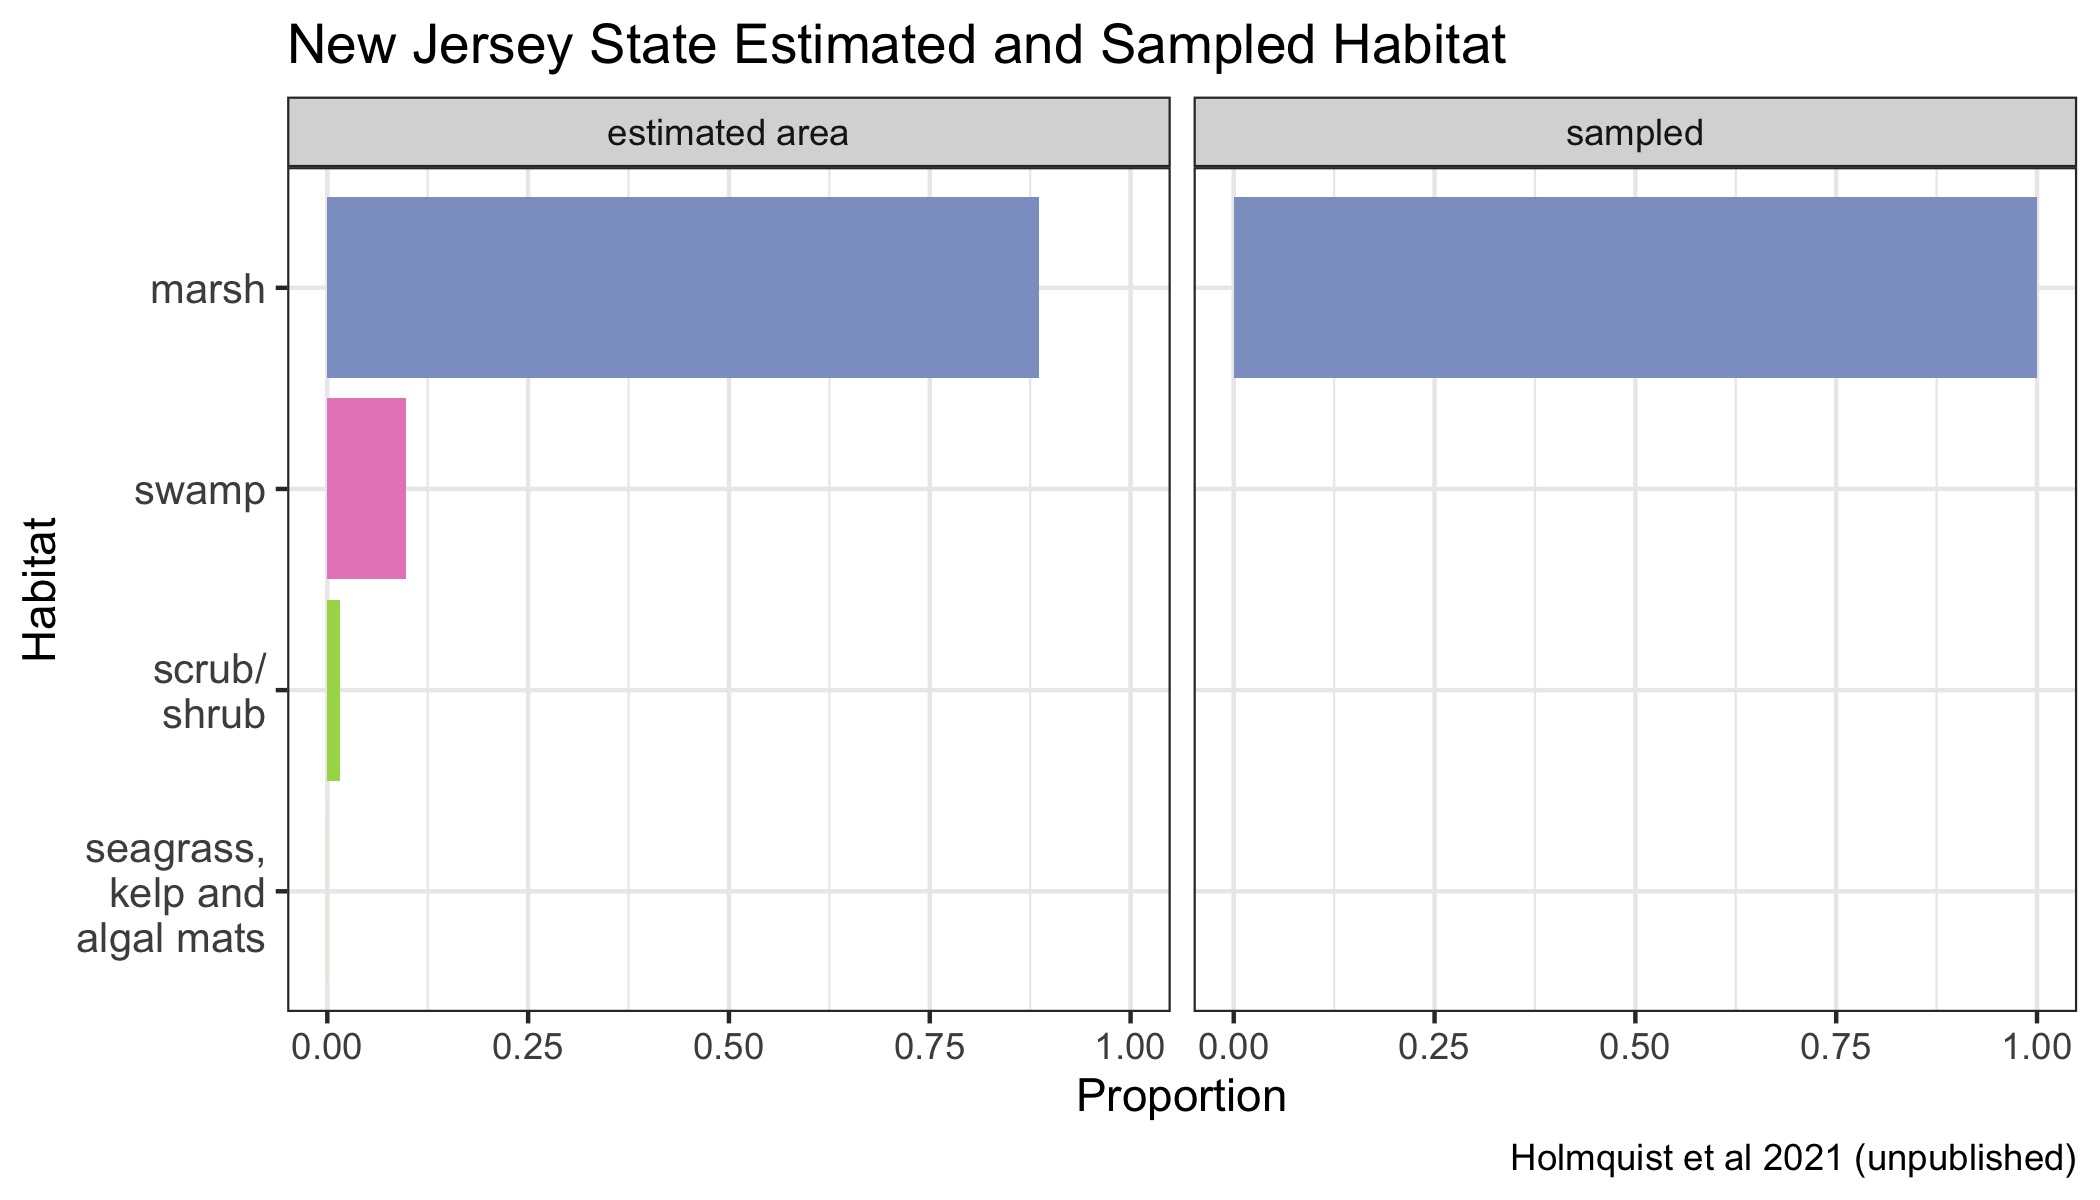 Proportions of various Blue Carbon habitats across New Jersey state represented in the dataset in proportion to their estimated area. Seagrasses, kelp beds and algal mats are all combined into a single category, because they are combined in the underlying mapping products.